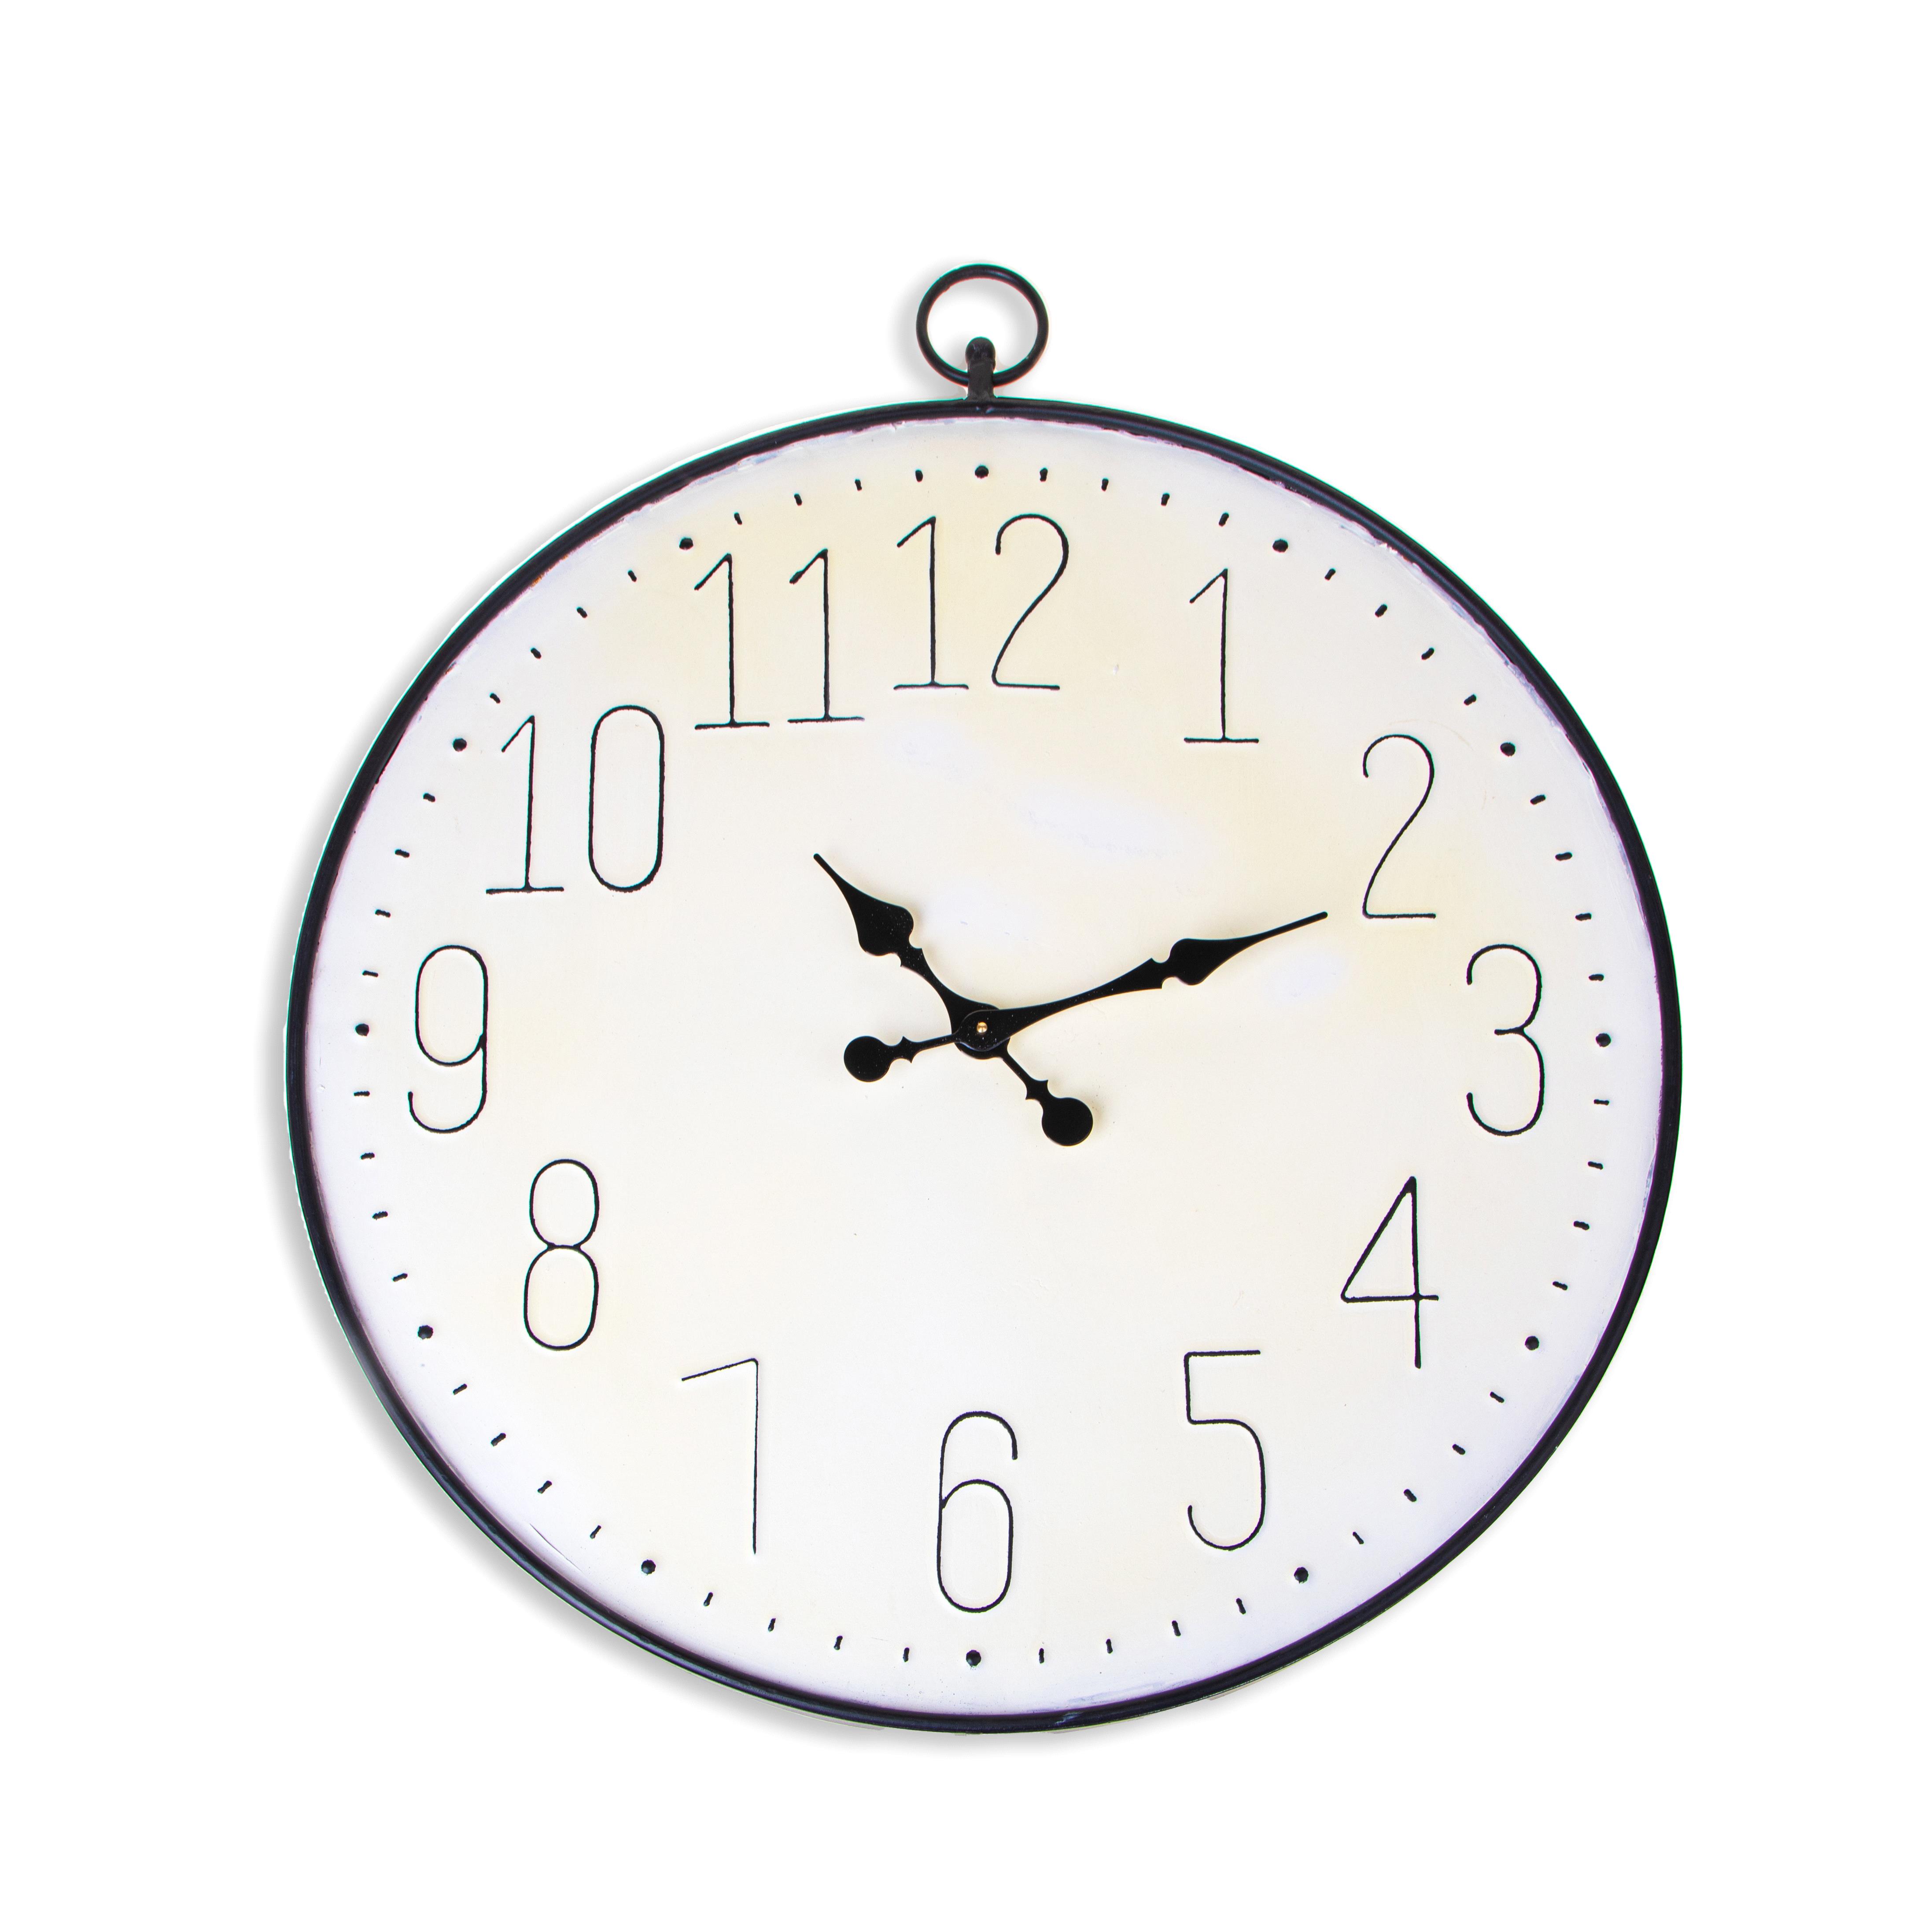 Home decors and accessories, GIFT ITEMS, INTERIORS ACCESSORIES, OROLOGIO D.80XH.90 CM